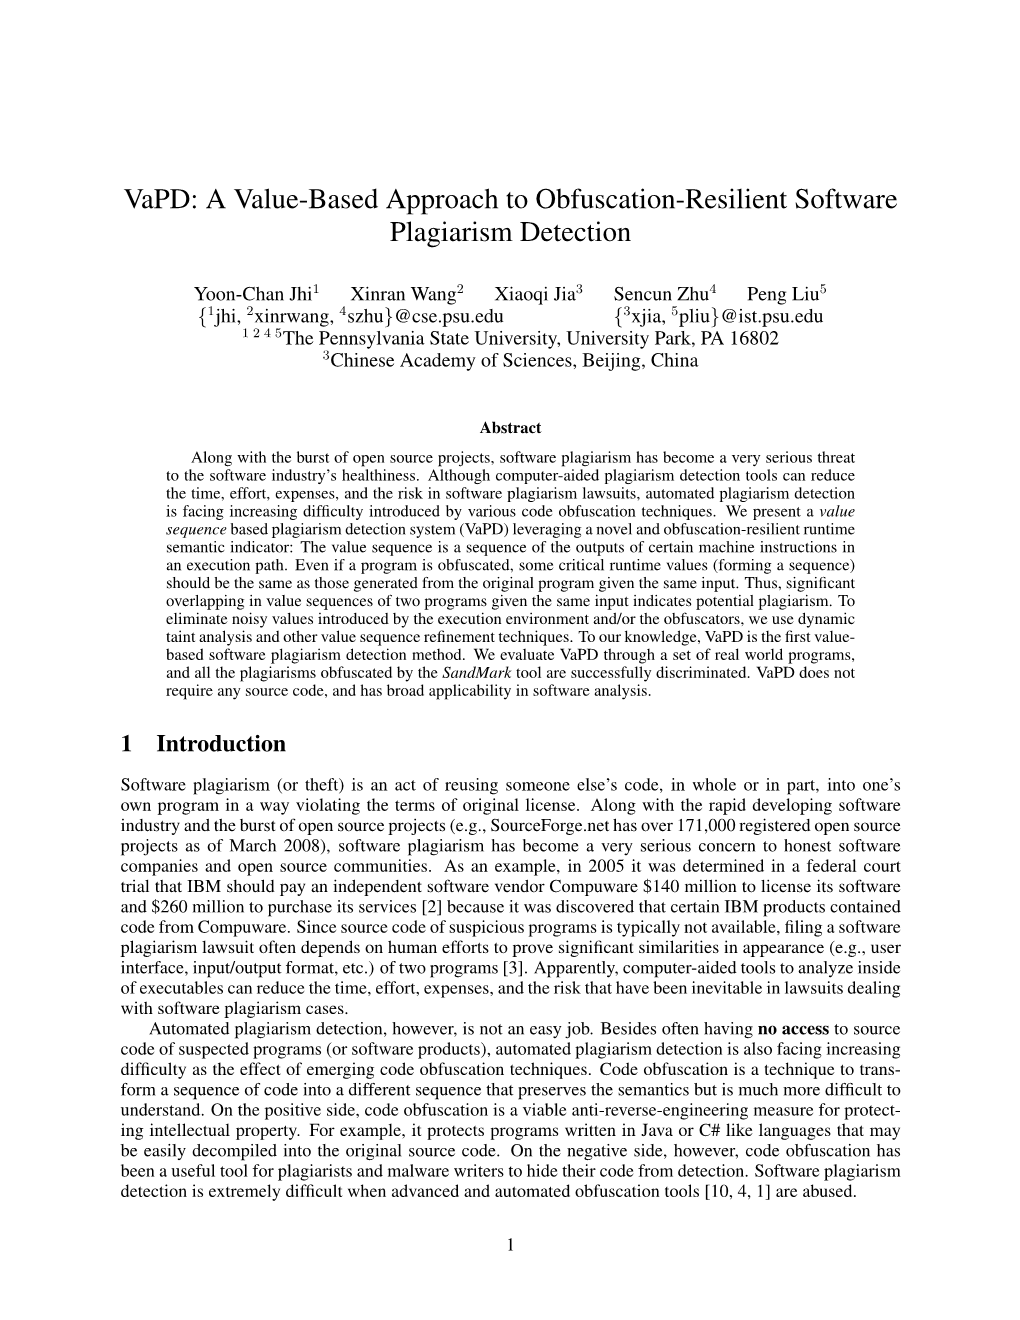 Vapd: a Value-Based Approach to Obfuscation-Resilient Software Plagiarism Detection